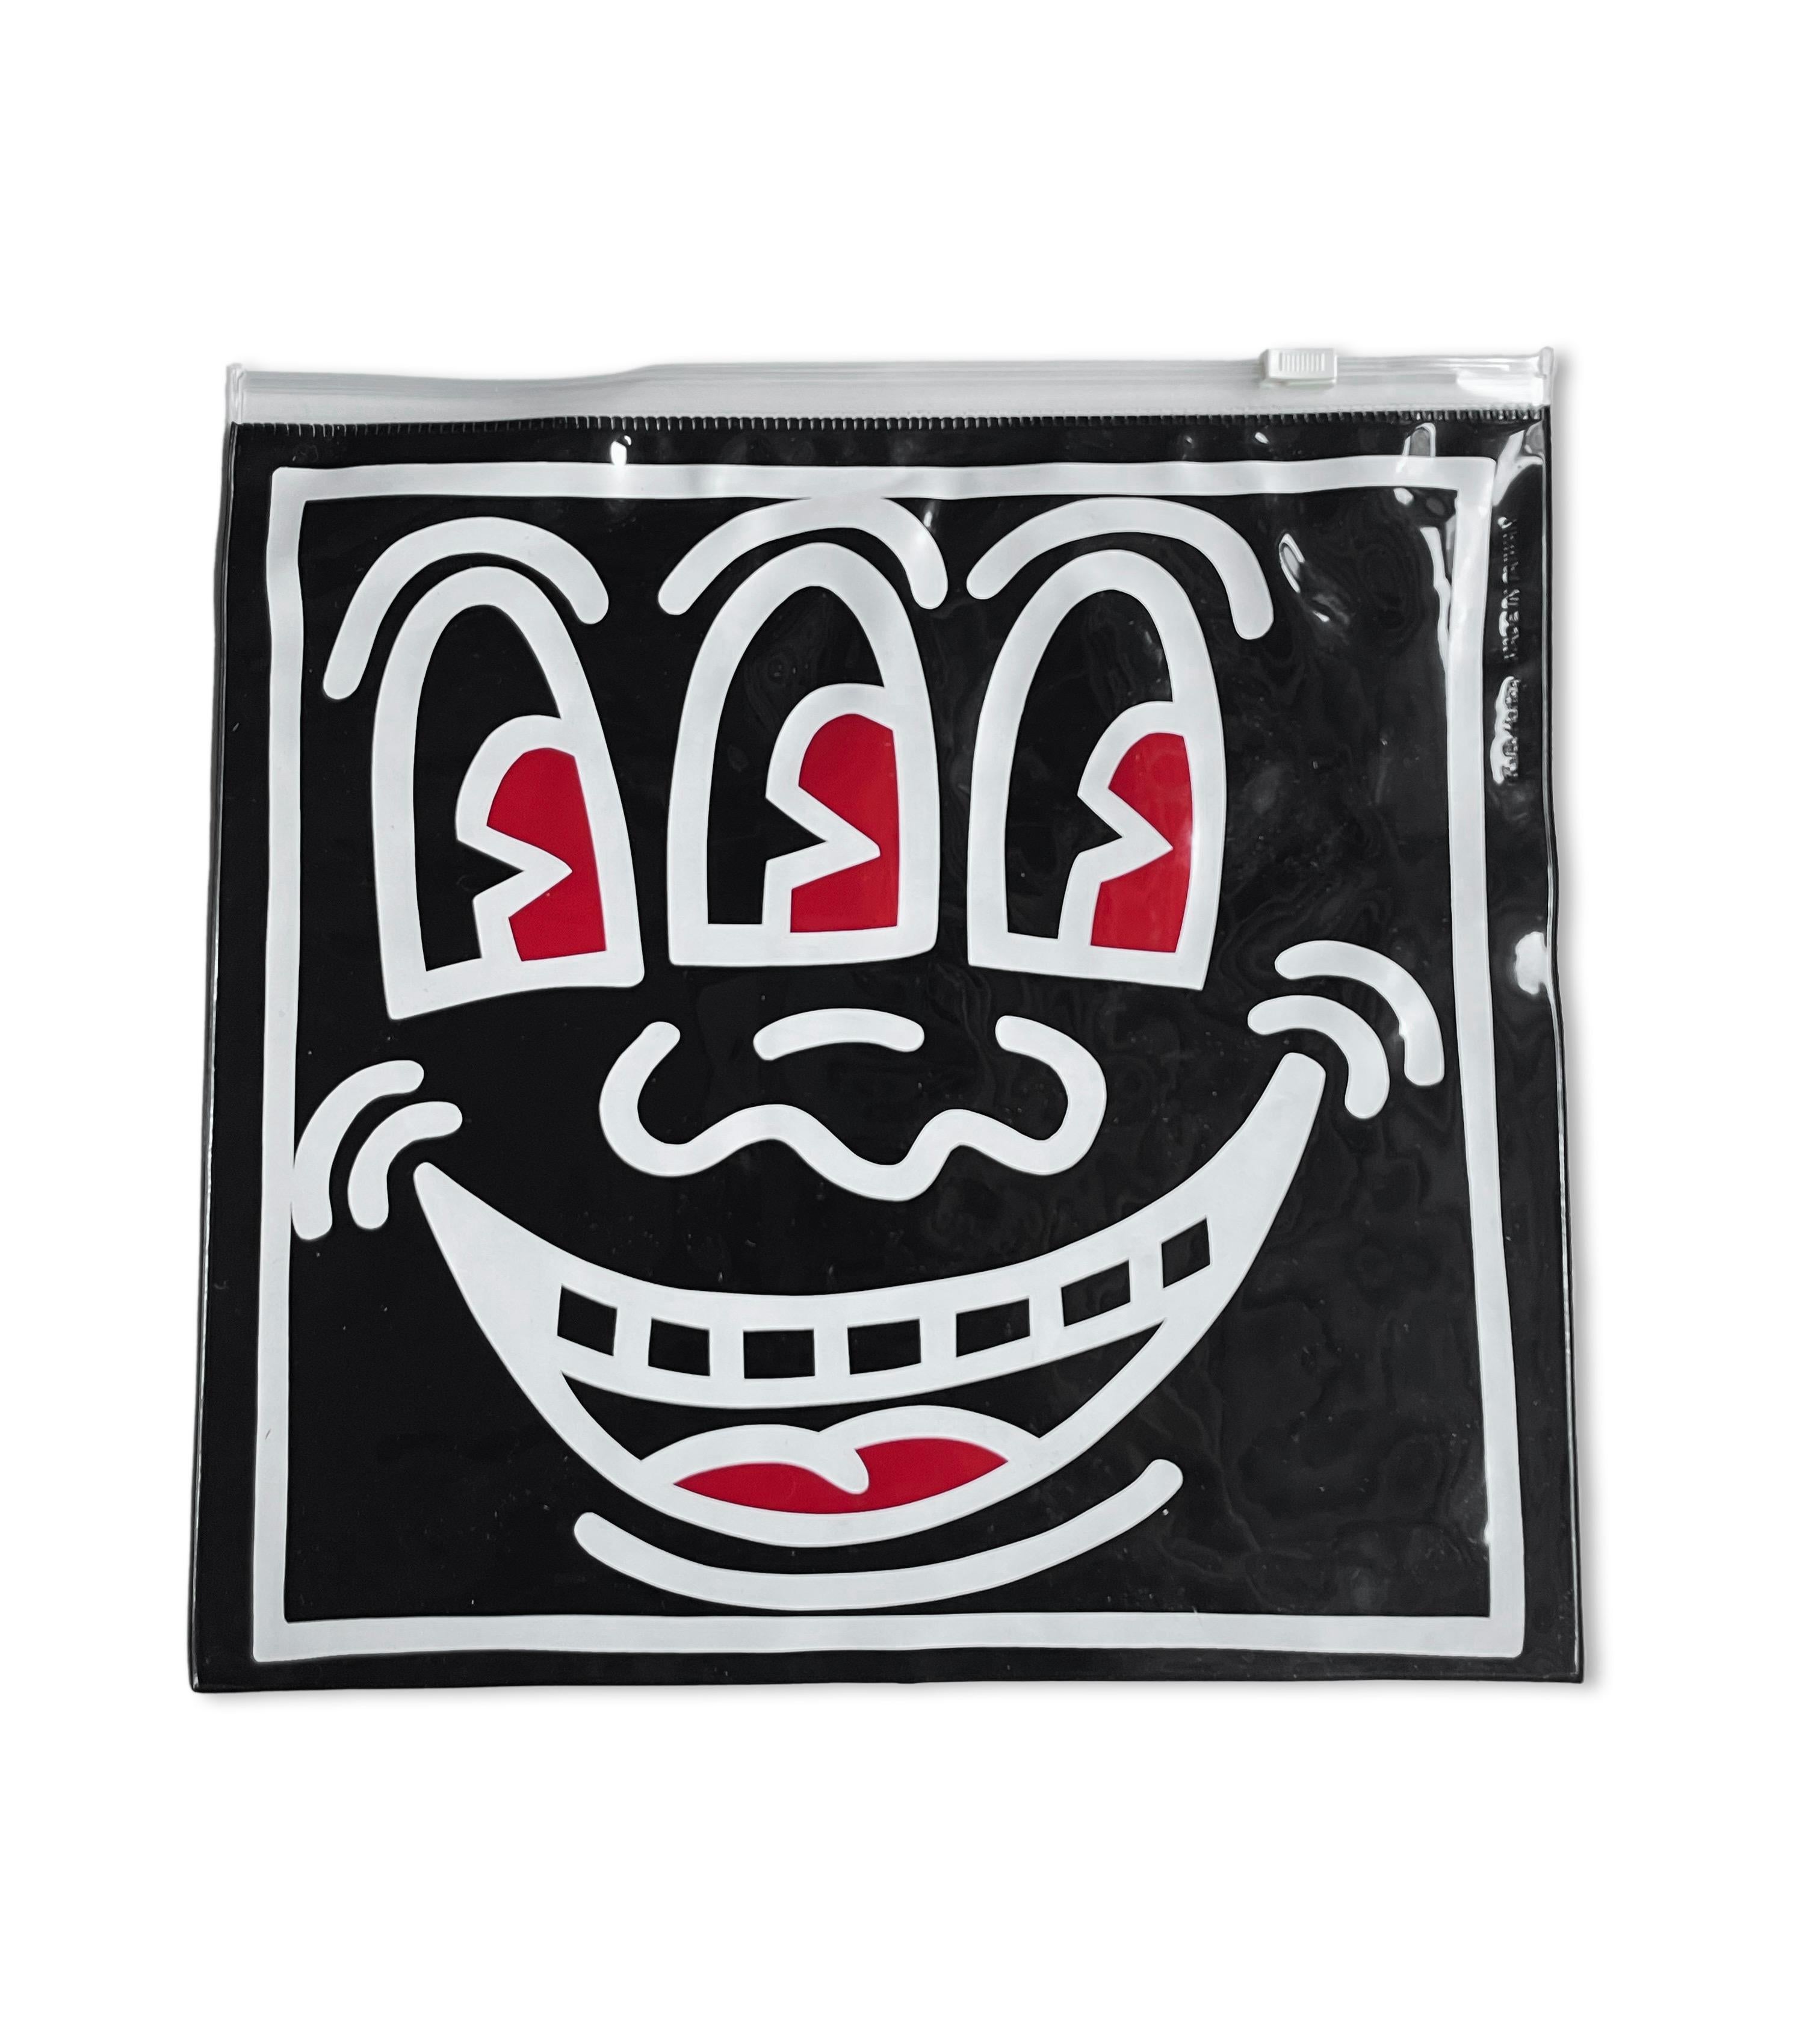 Keith Haring Pop Shop bag c.1987:
Rare original 1980s Keith Haring Pop Shop collectible featuring Keith Haring’s Three Eyed Smiling Face on a double-sided vinyl pouch. A classic 1980s Keith Haring Pop Shop collectible that is well-suited for